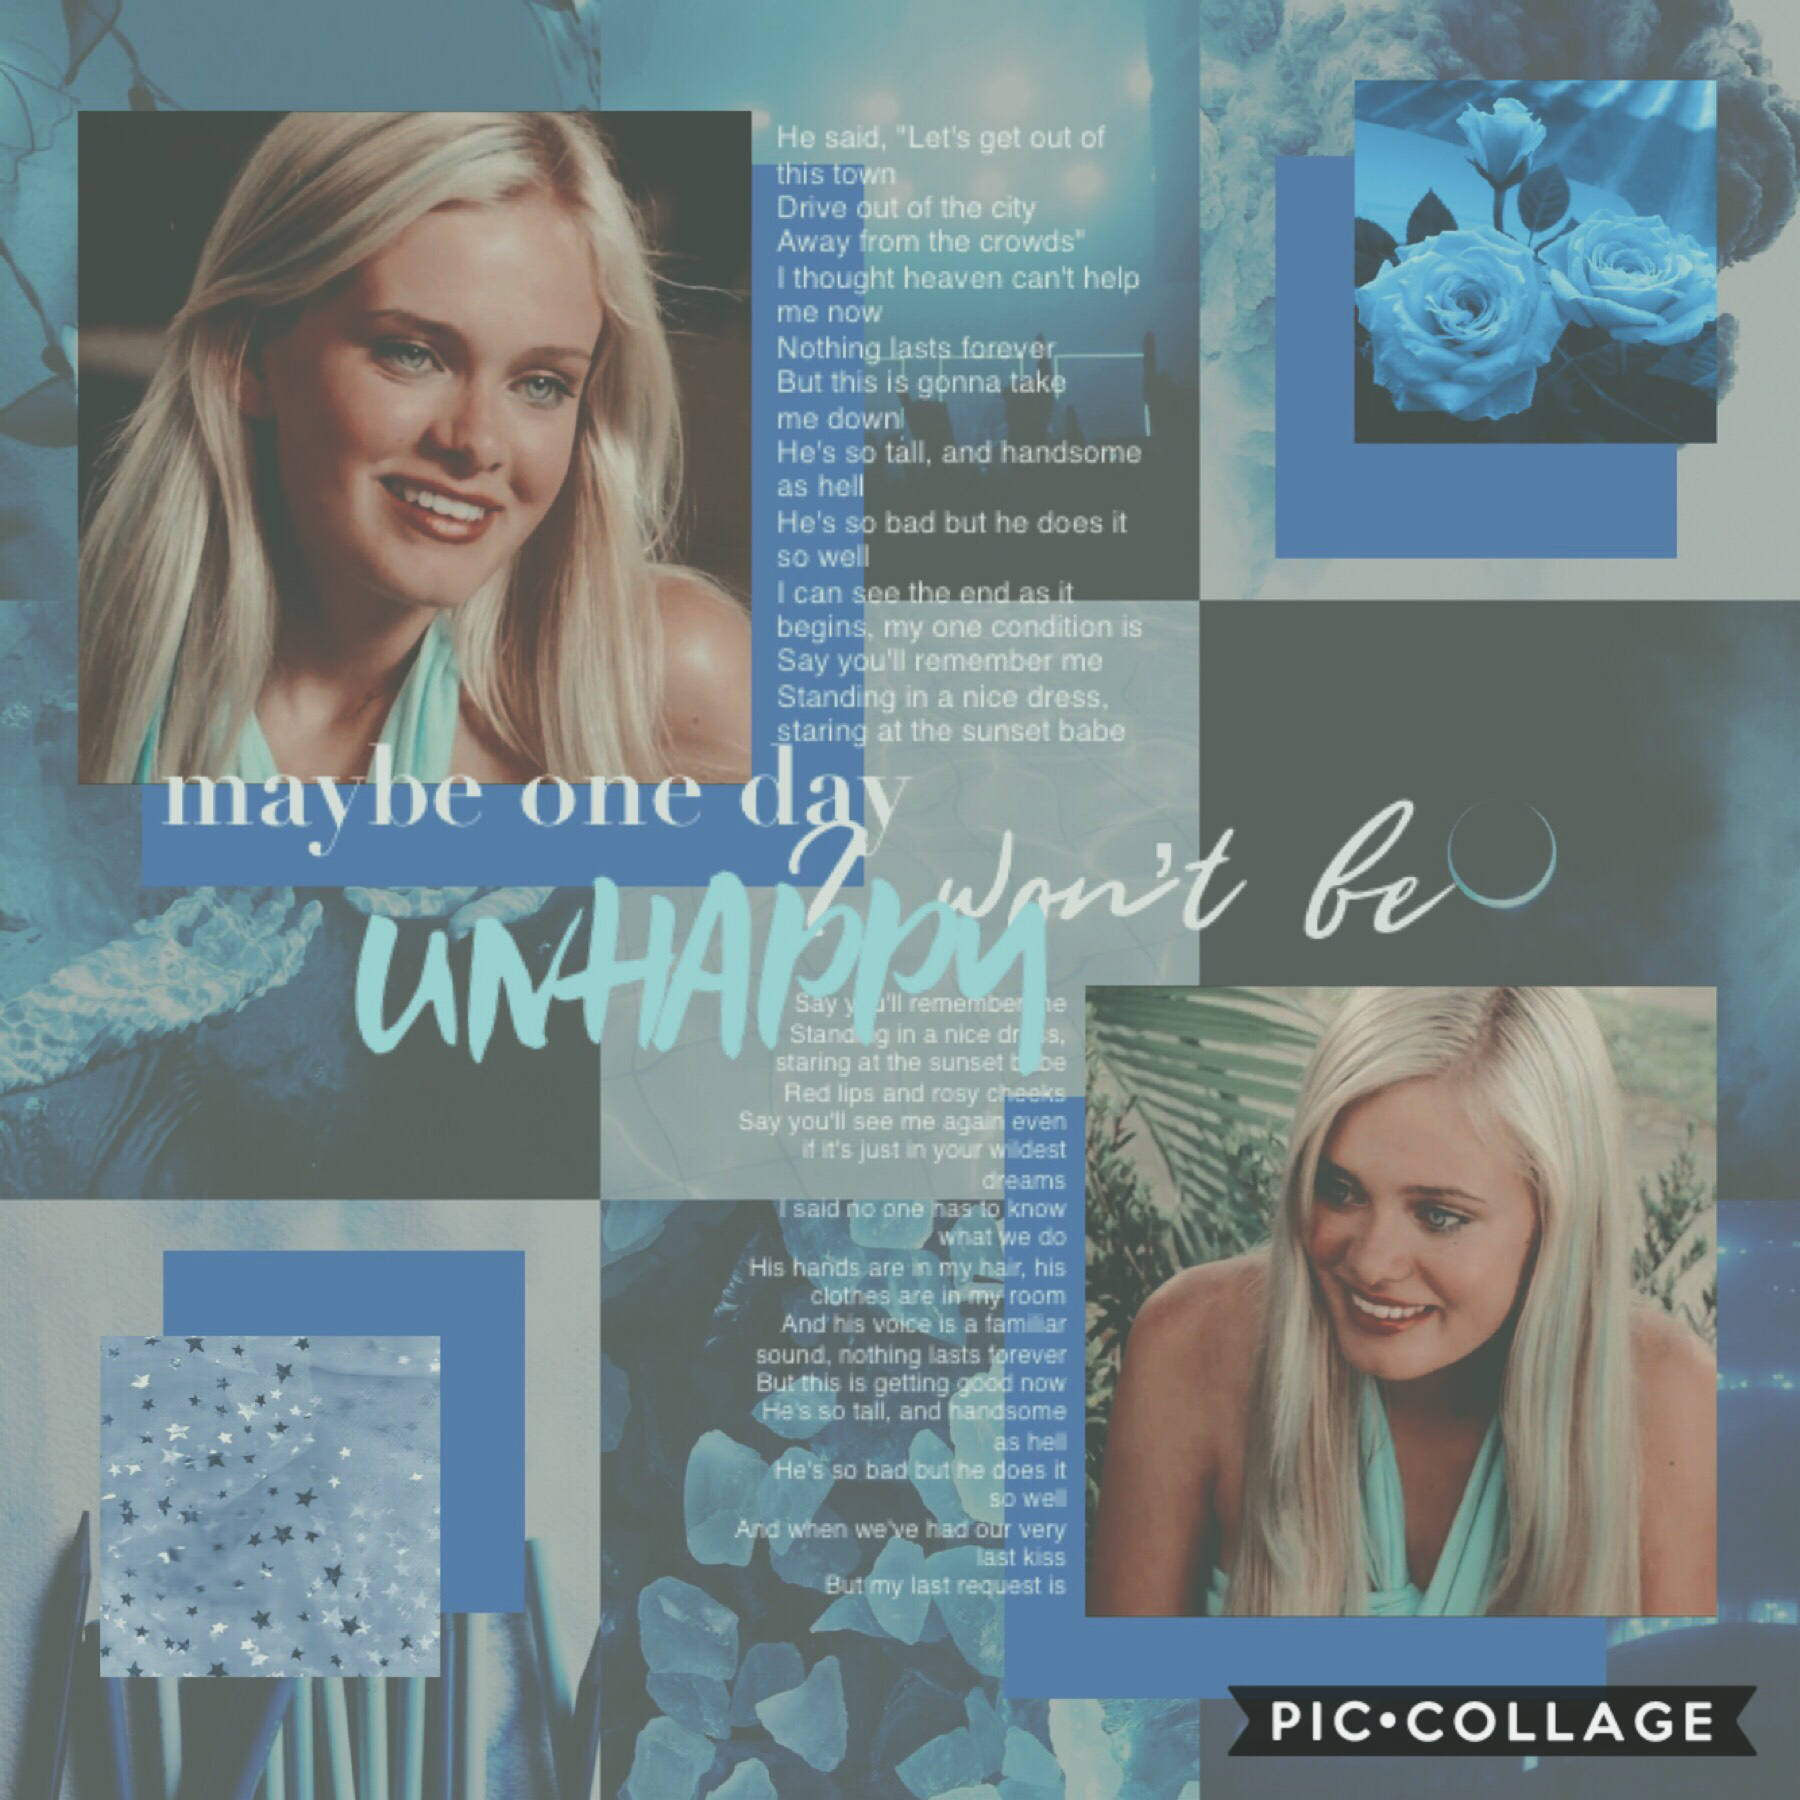 TAP 
This is an edit dedicated to my rp character Gali for PC High. 💙 Agh I love Sara Paxton as her face claim. This edit’s theme is inspired by Lyds (@-THIEVES-) and lyrics from the song Wildest Dreams by Taylor Swift.
————————-
QOTD: Fav tv show?
AOTD: 